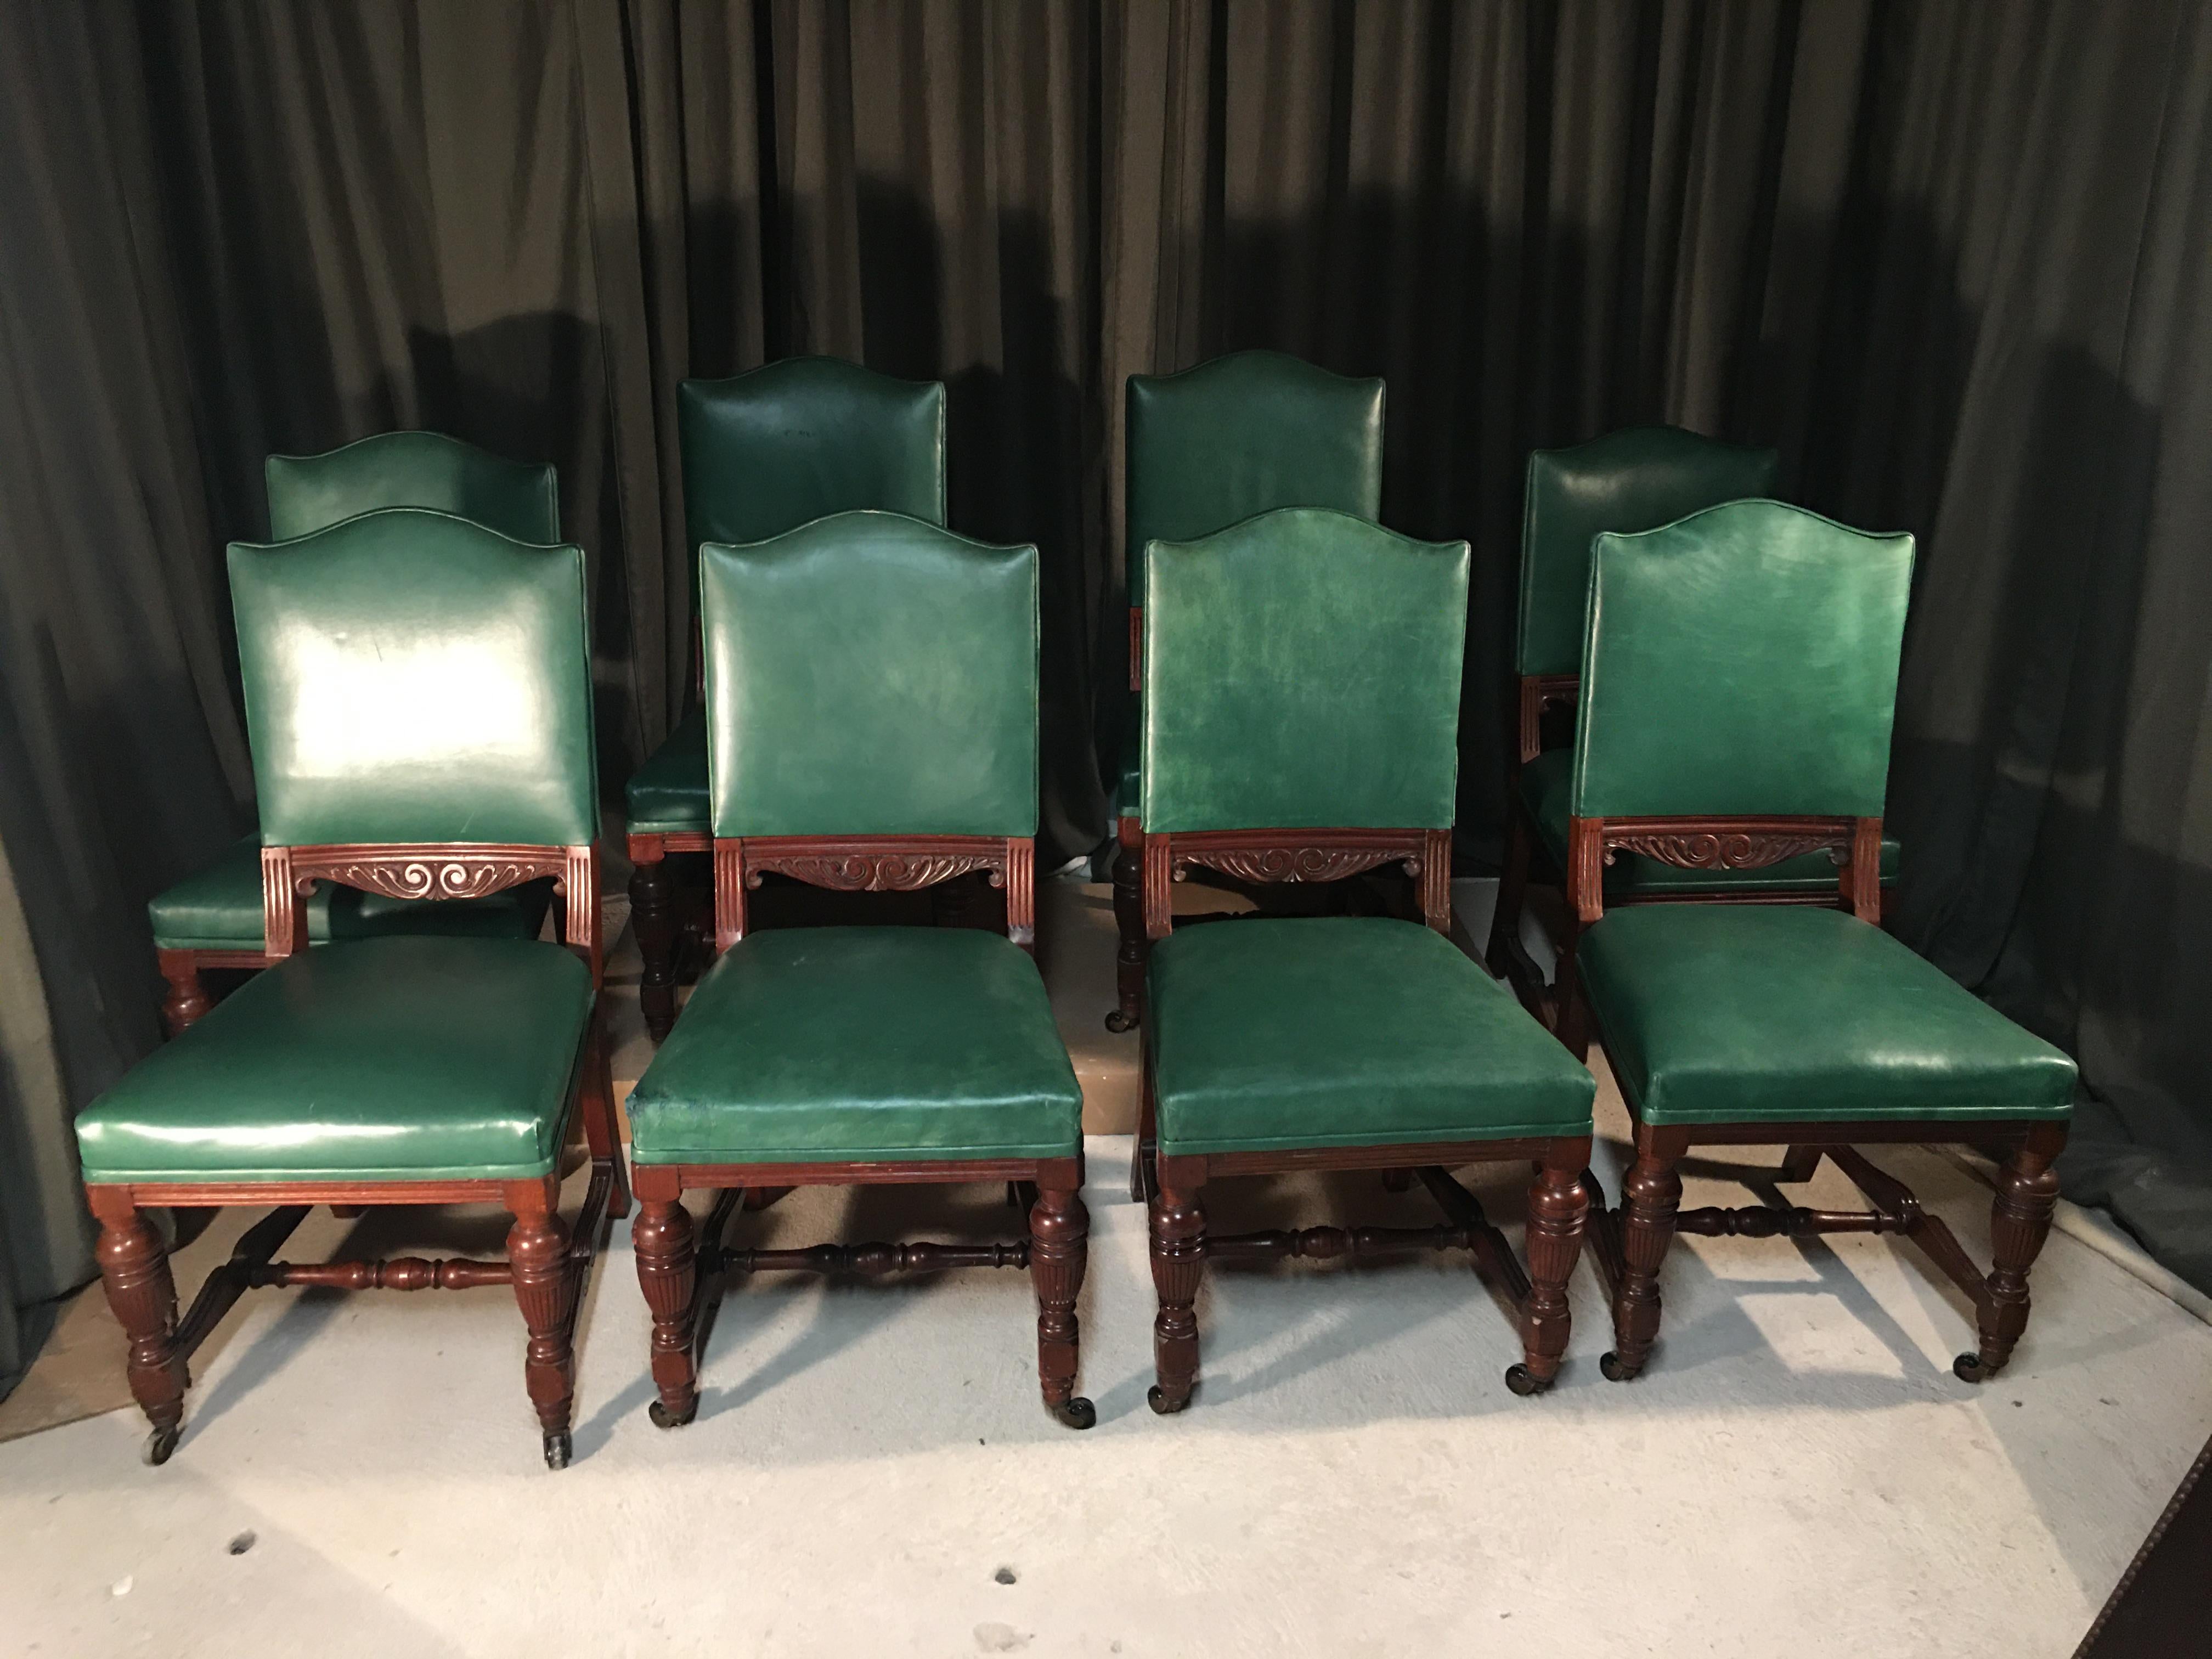 Series of 8 English Chairs in Green Leather, Mahogany, Early 20th Century In Fair Condition For Sale In Nice, FR